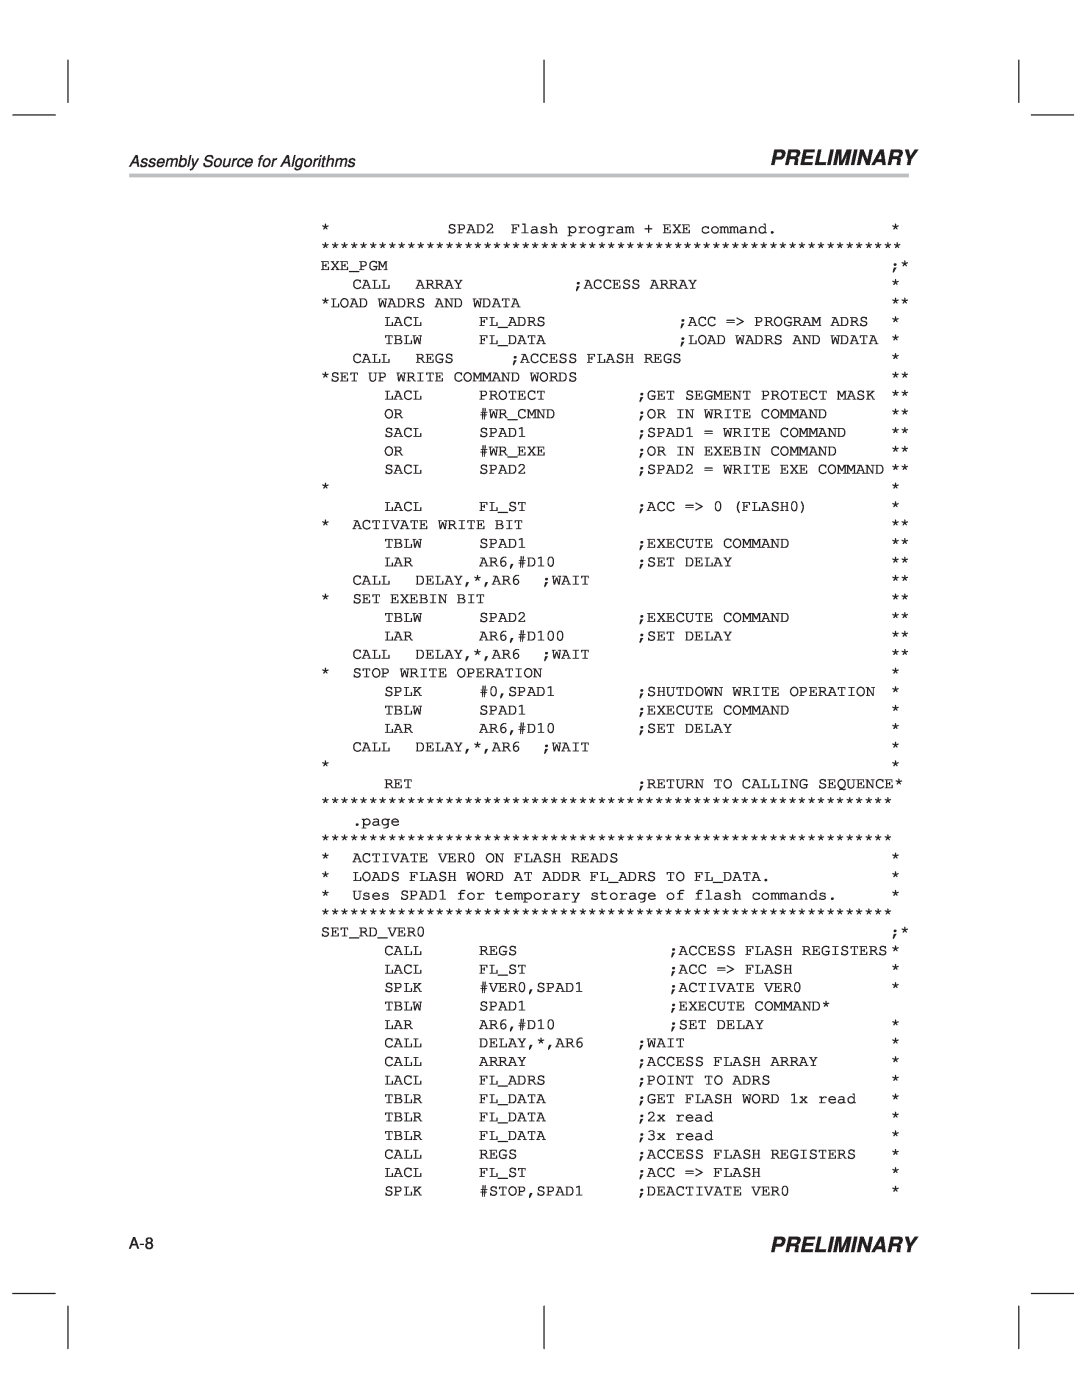 Texas Instruments TMS320F20x/F24x DSP manual Preliminary, Assembly Source for Algorithms 